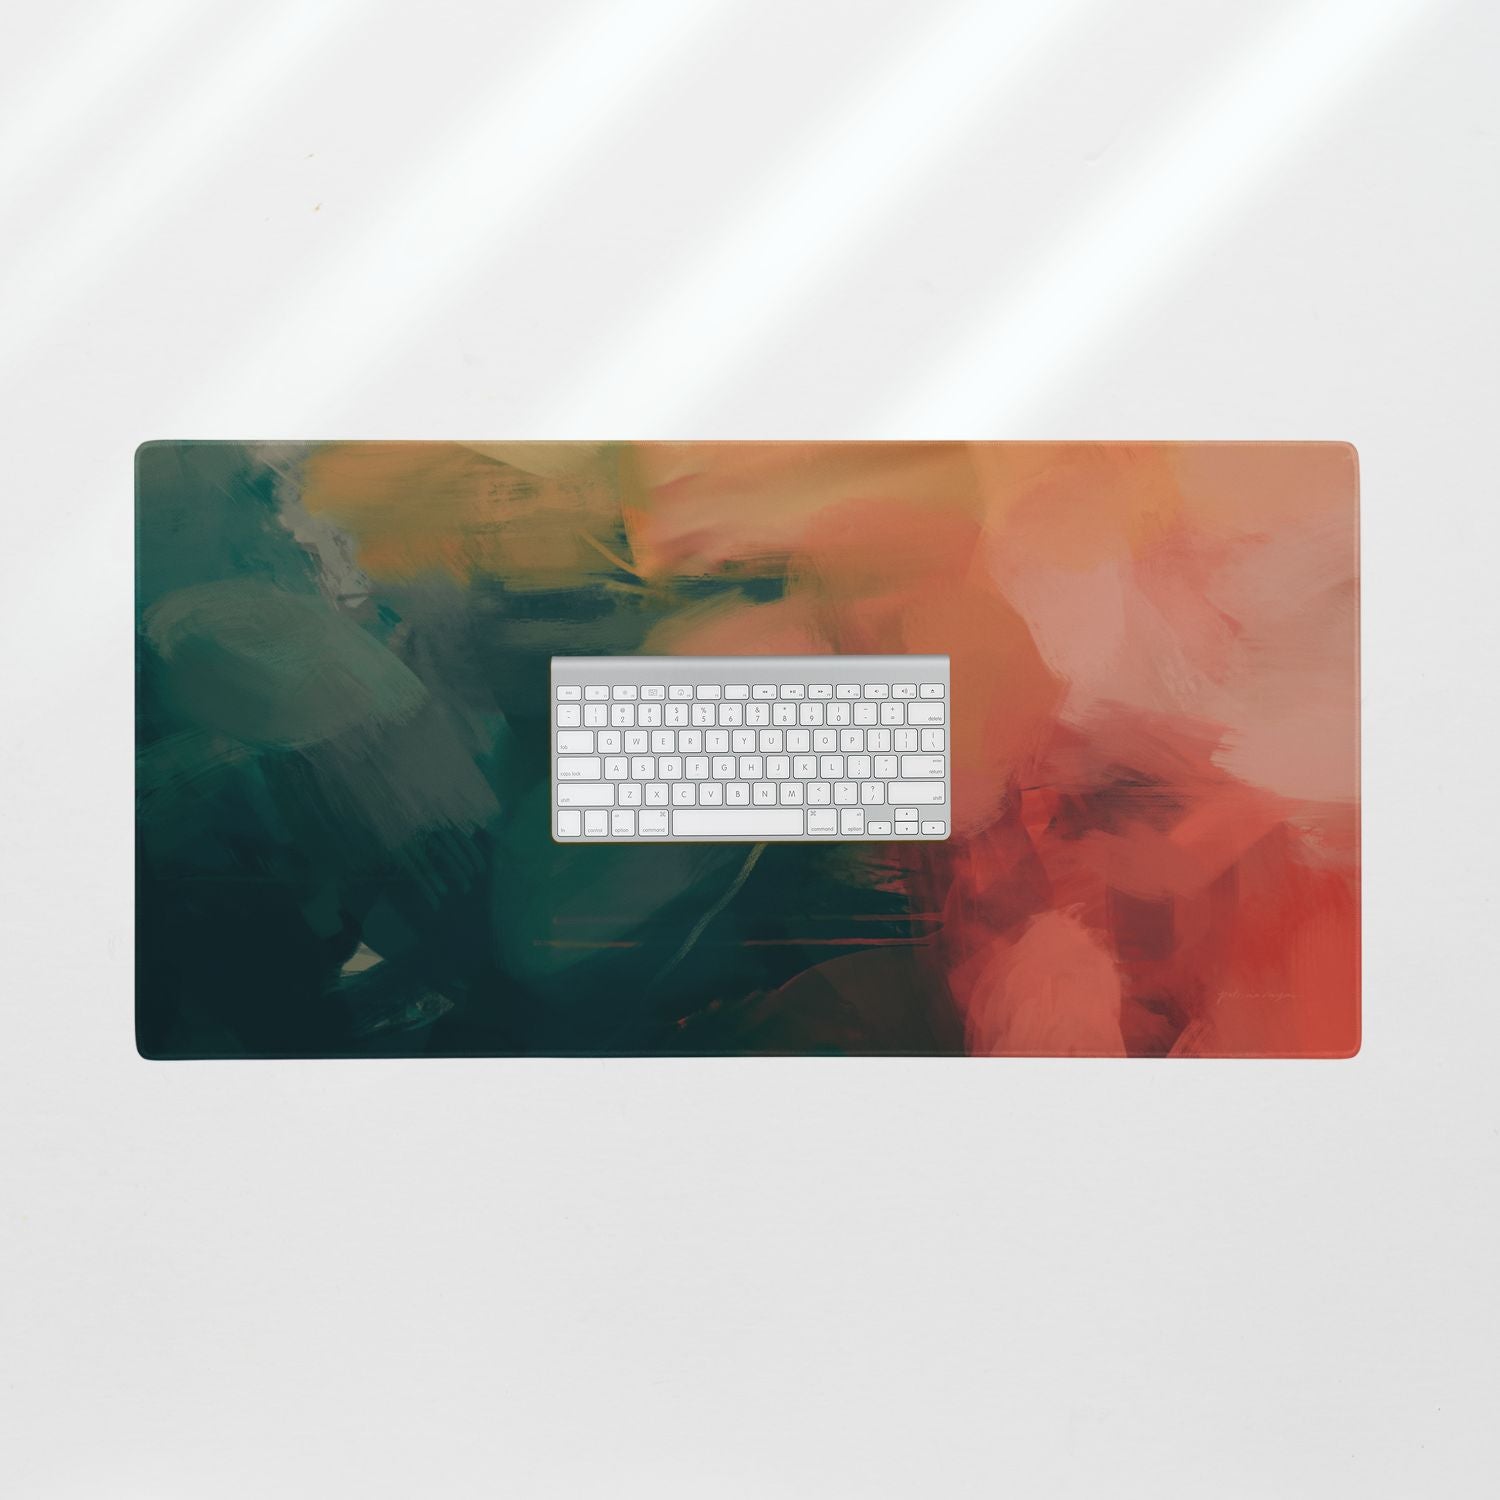 Eventide, green and red desk mat for styling your office desk. Featuring artwork by Parima Studio. Home office styling accessories, cubicle styling accessories.